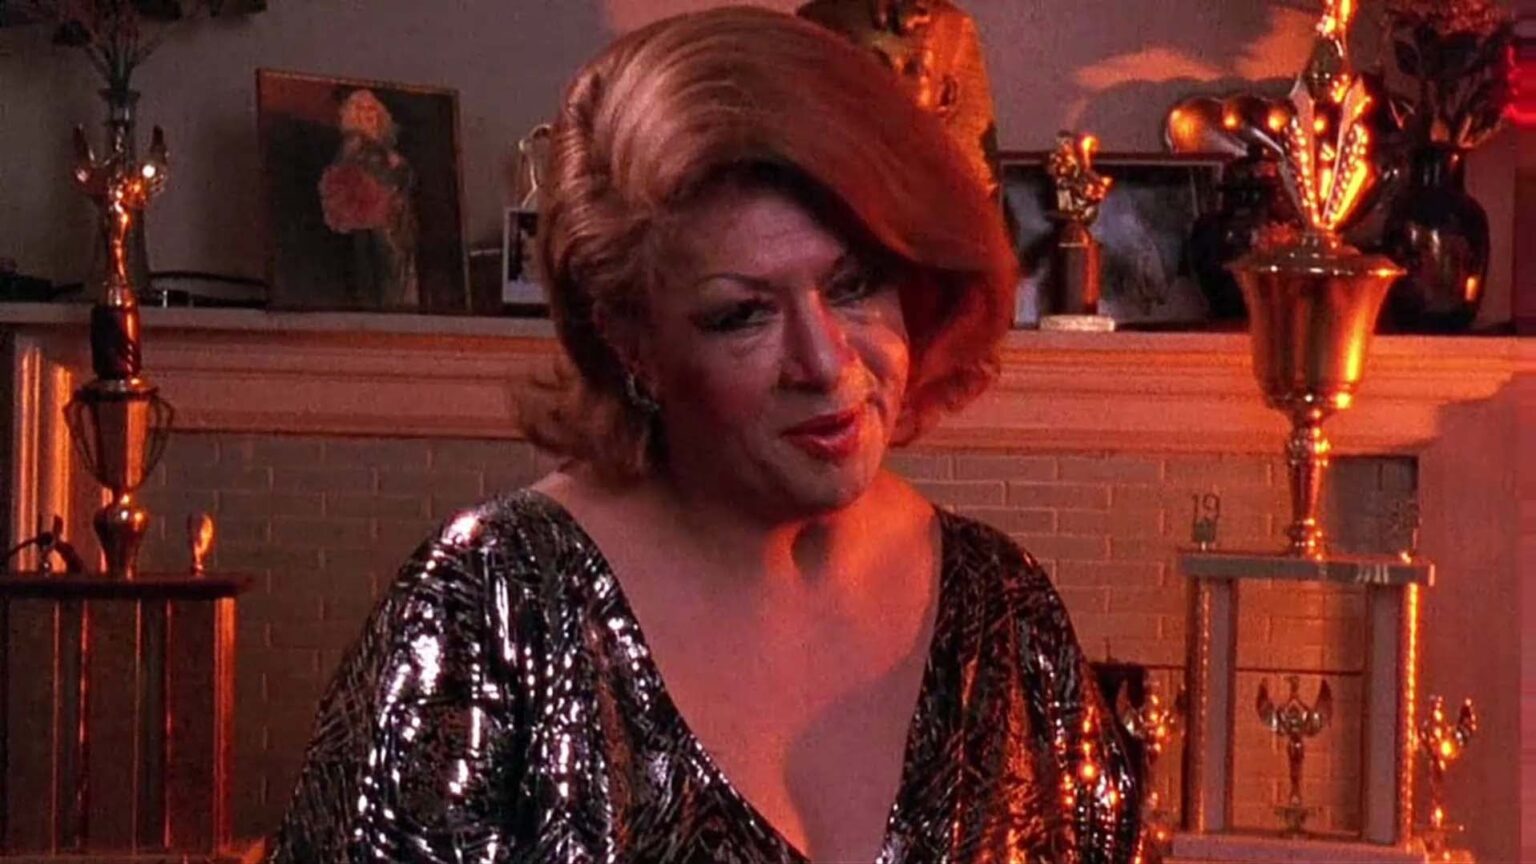 Ever heard the story about the famous drag queen with a mummy in her closet? Learn all about Dorian Corey and the secret that was found after her death.